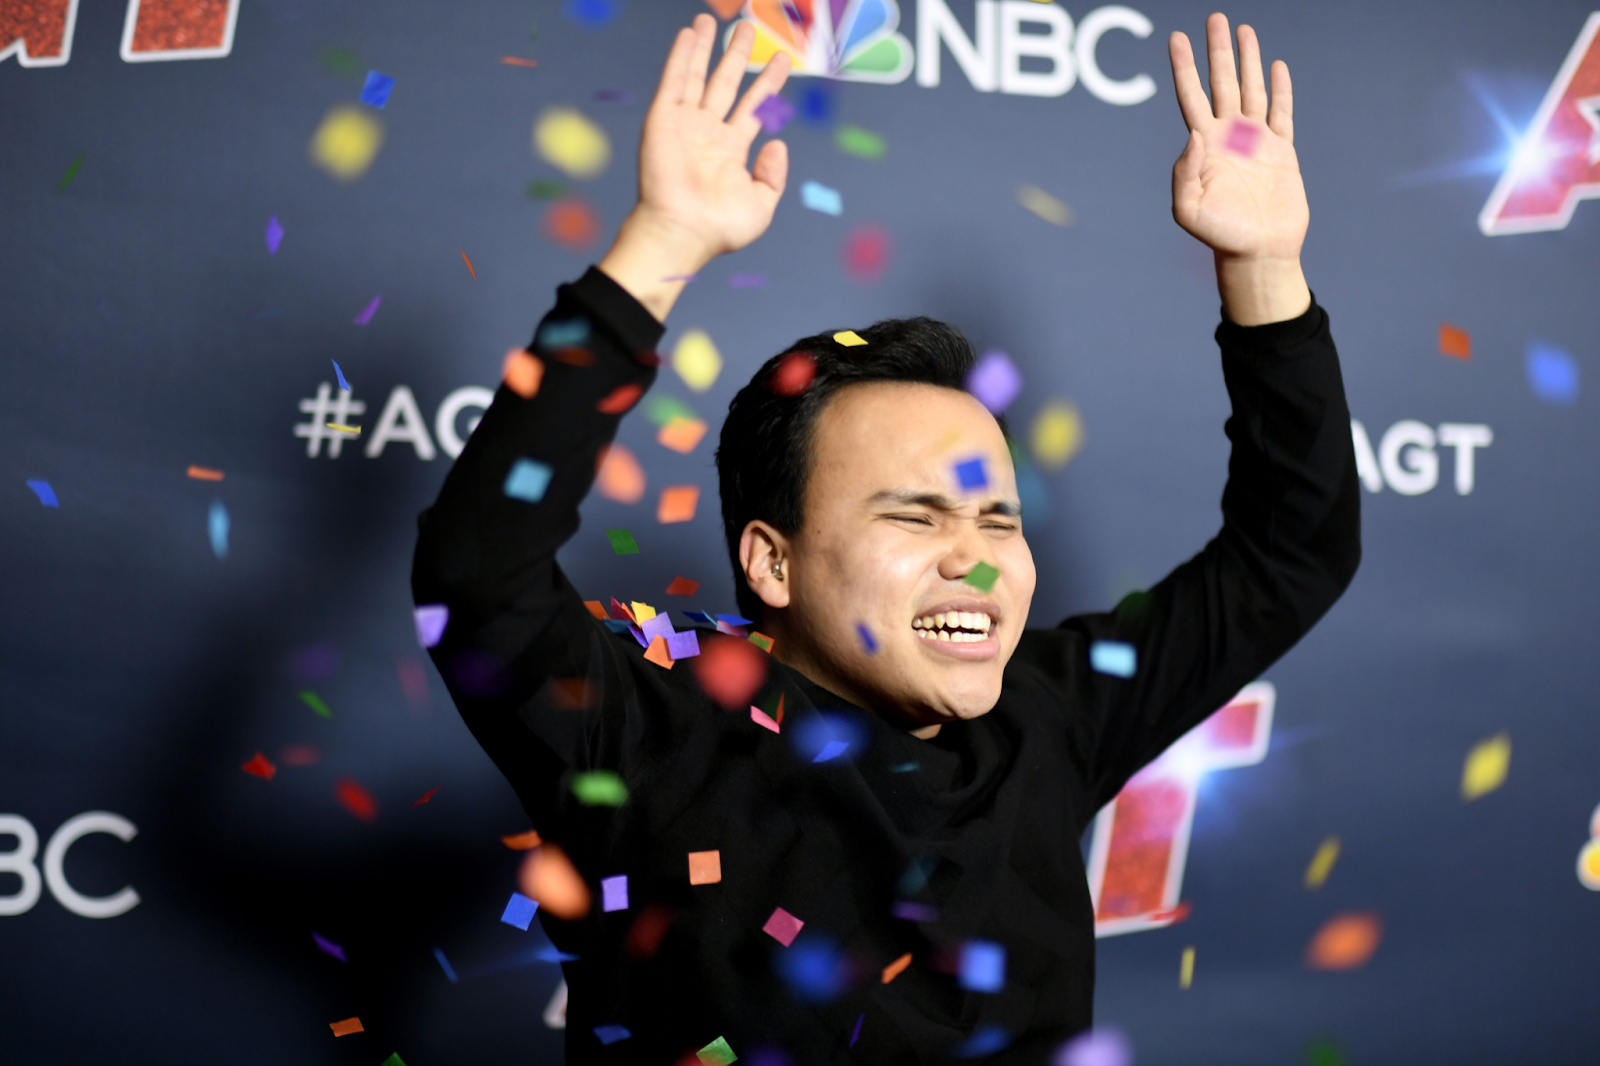 Kodi Lee after winning AGT with confetti in the air.